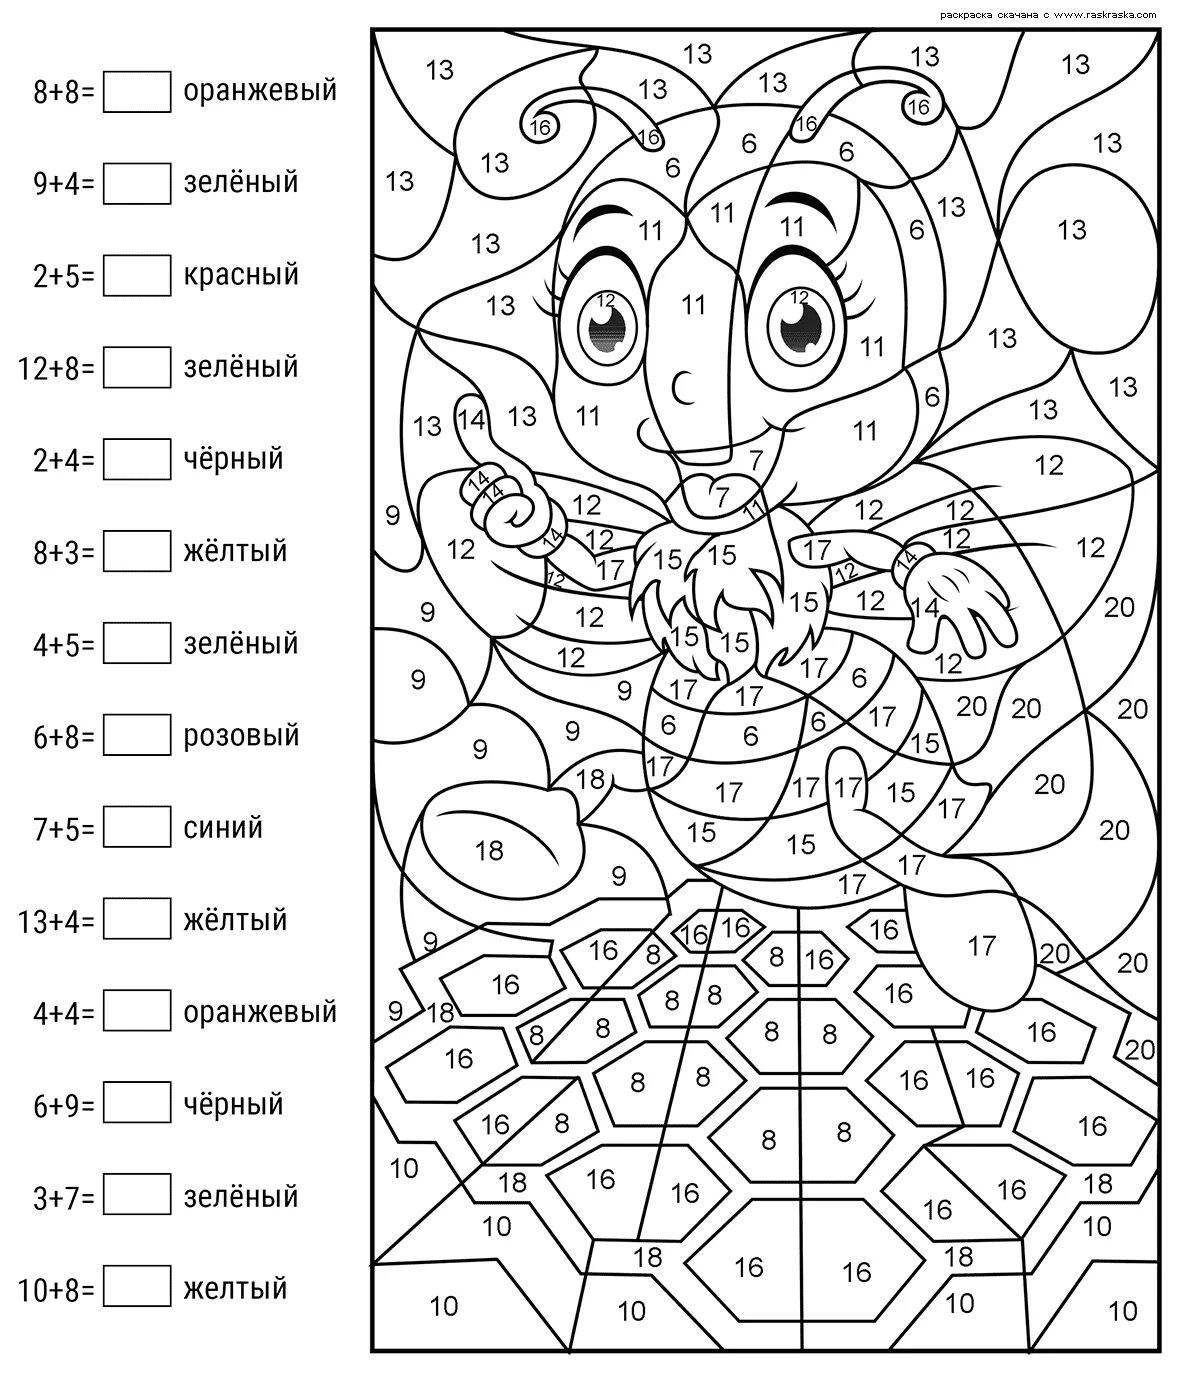 Examples of colorful coloring pages for toddlers